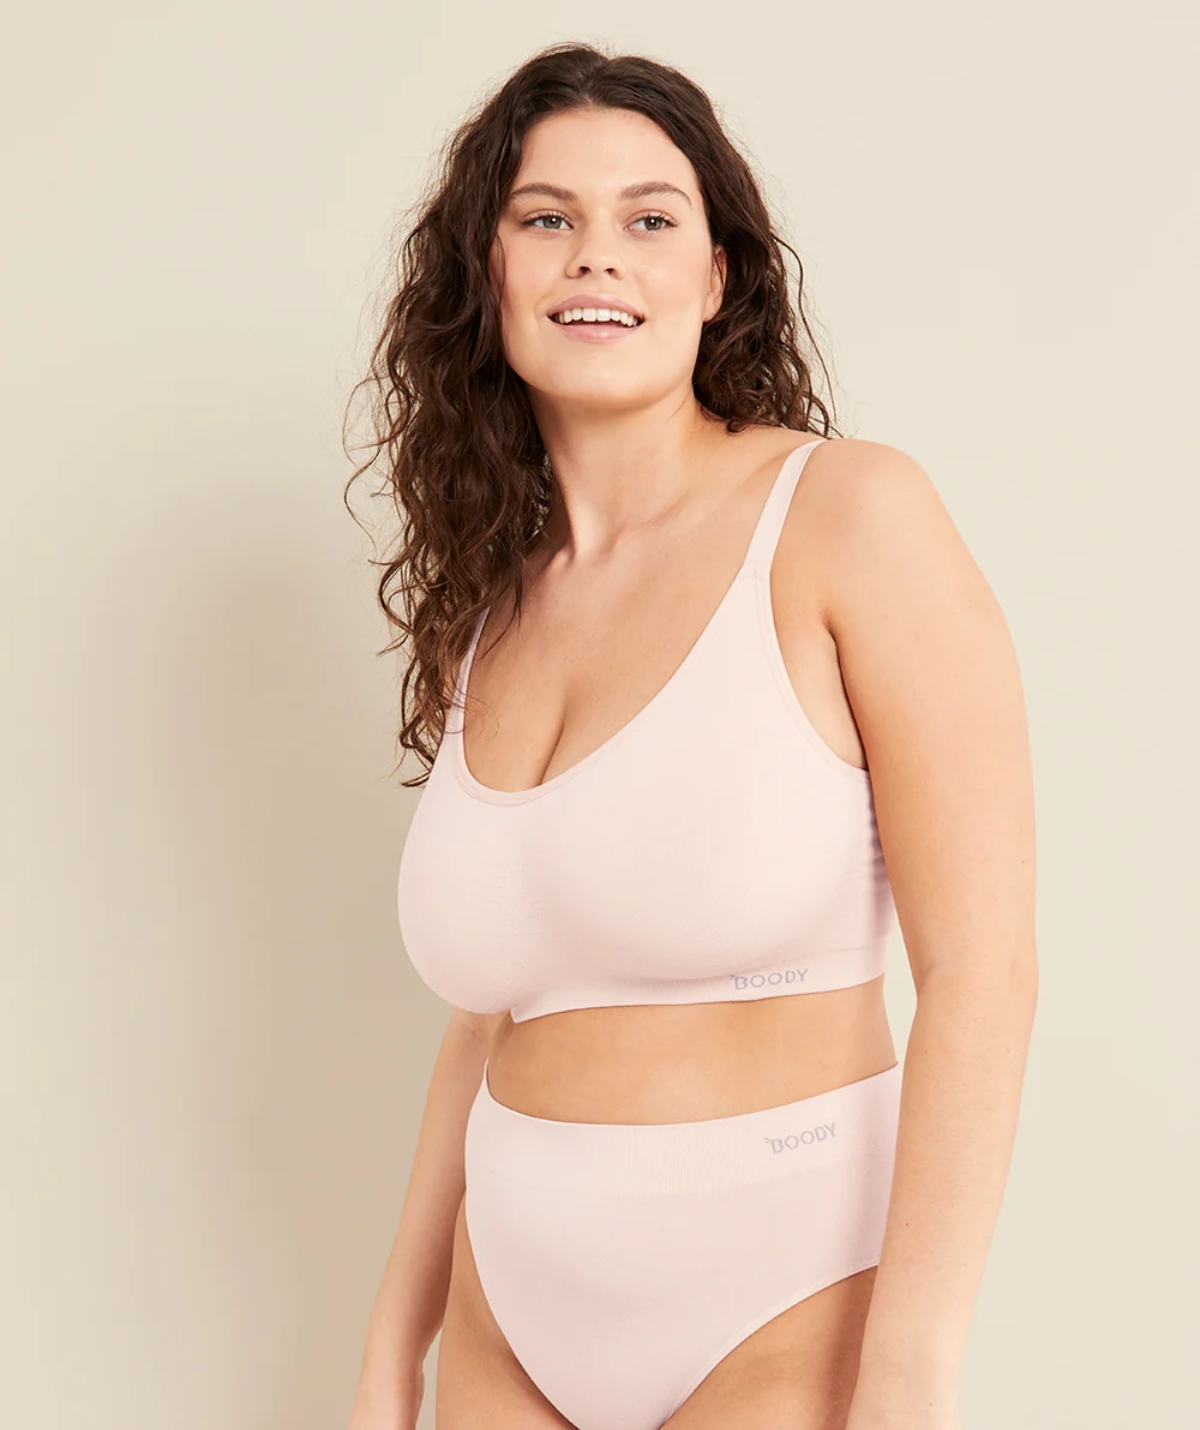 Fayreform Cotton Kindness Front Opening Wire Free Bra in White